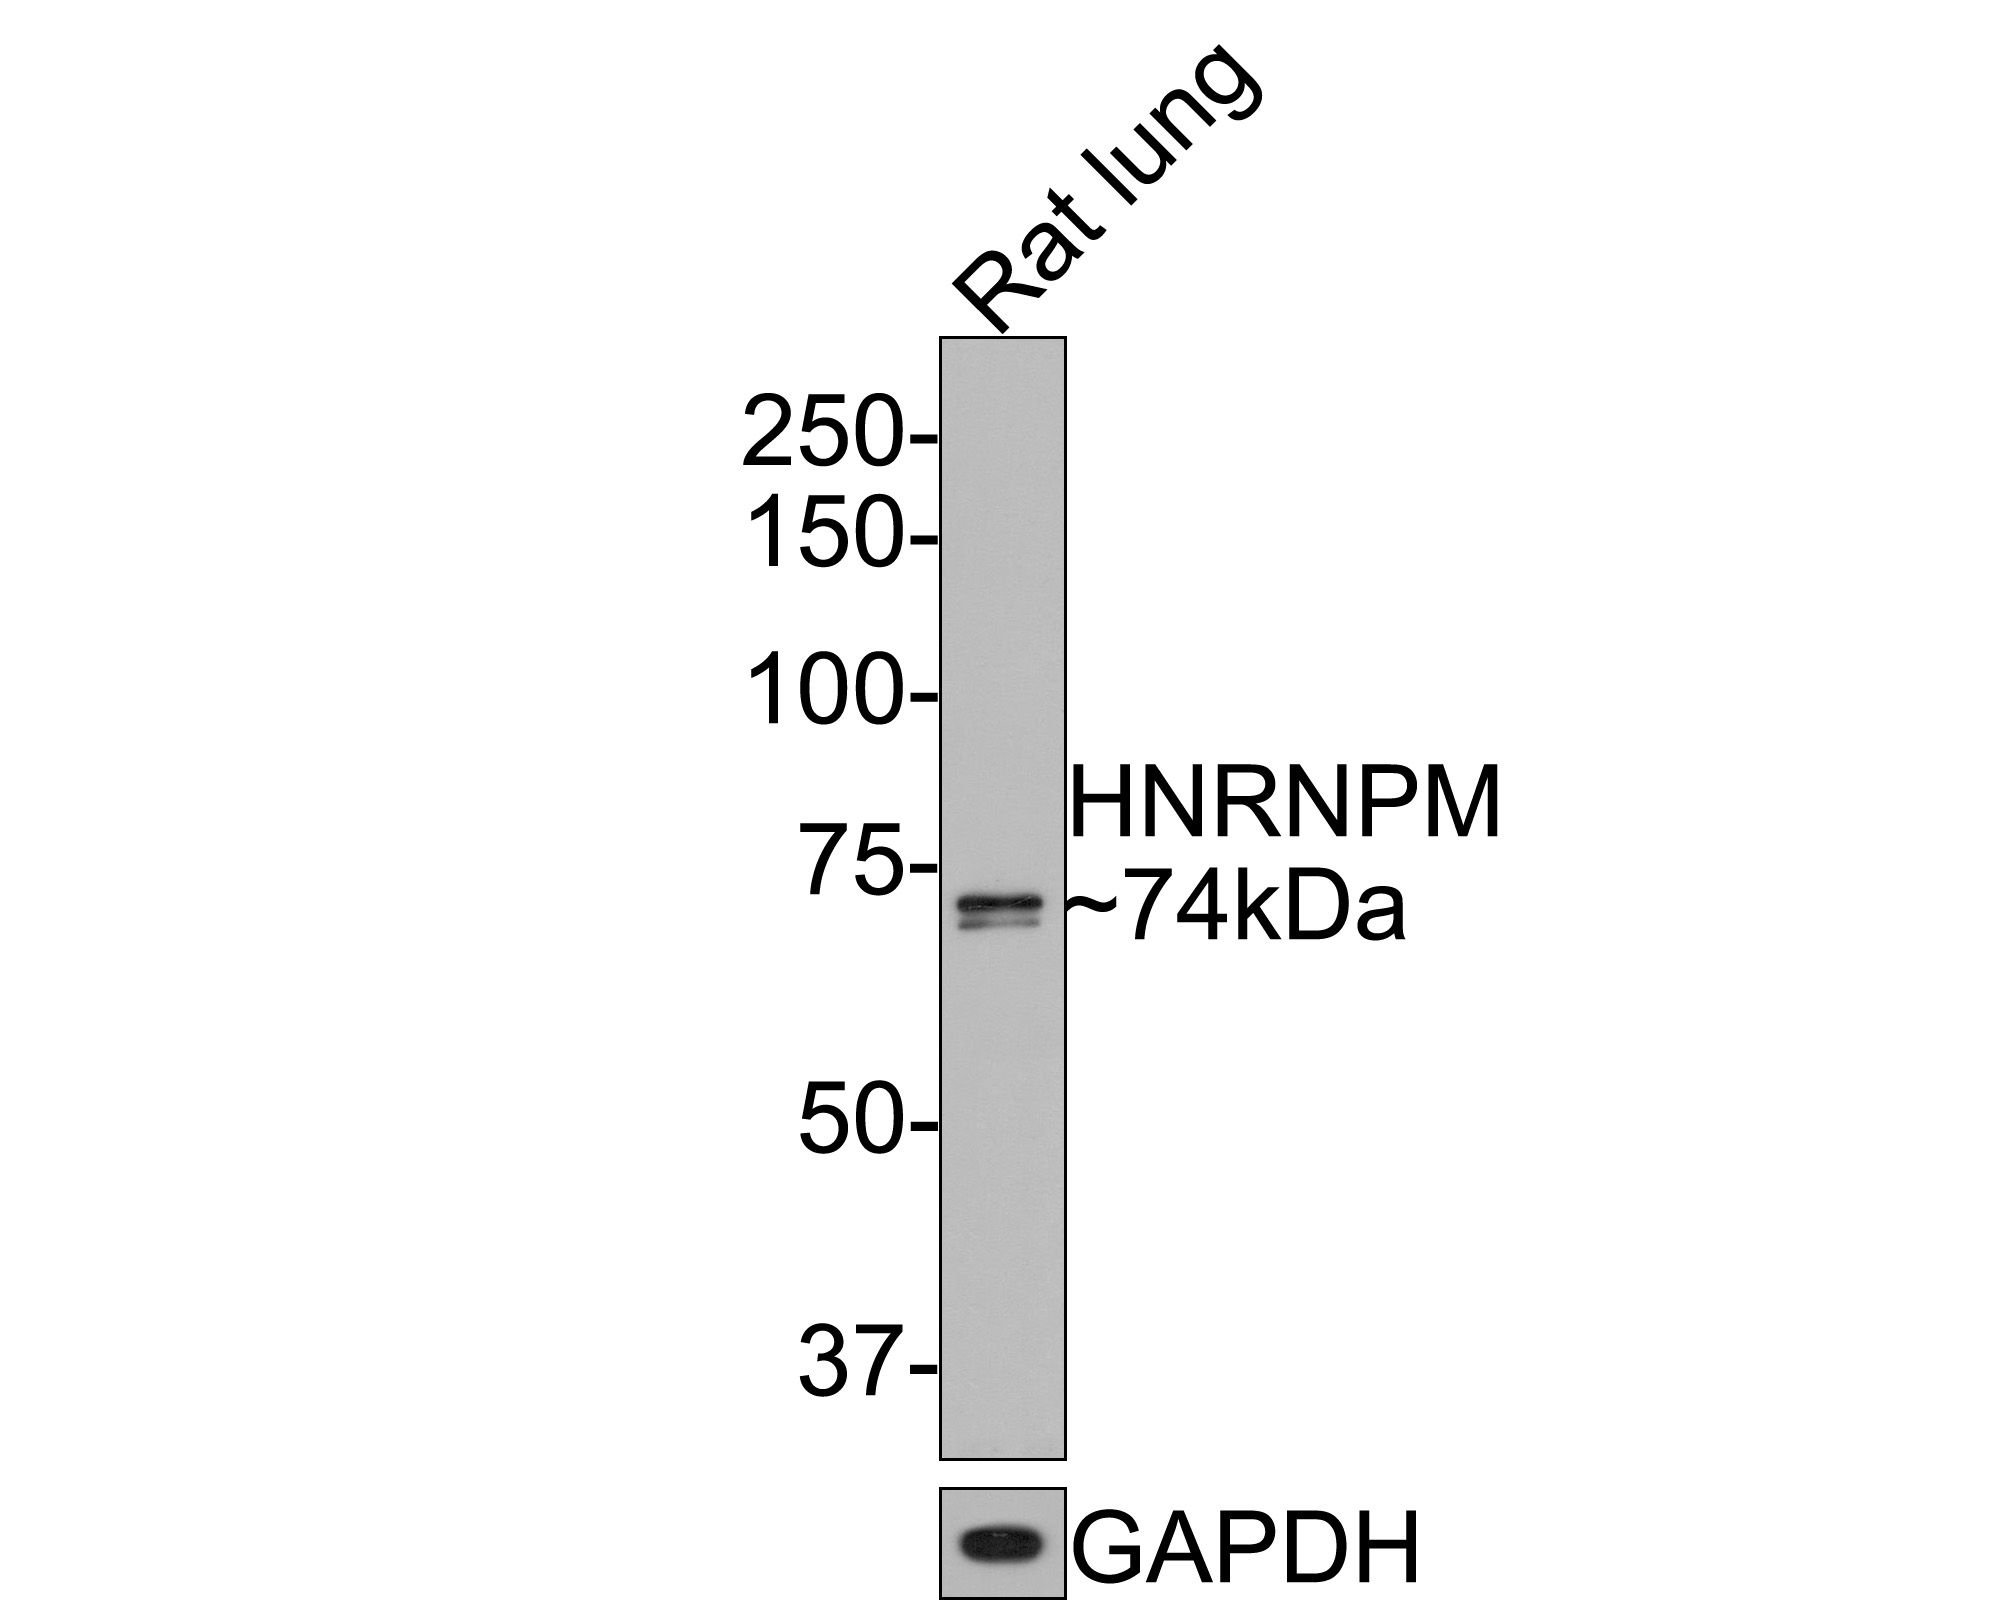 Western blot analysis of HNRNPM on rat lung tissue lysates with Rabbit anti-HNRNPM antibody (HA721103) at 1/500 dilution.<br />
<br />
Lysates/proteins at 20 µg/Lane.<br />
<br />
Predicted band size: 78 kDa<br />
Observed band size: 74 kDa<br />
<br />
Exposure time: 2 minutes;<br />
<br />
8% SDS-PAGE gel.<br />
<br />
Proteins were transferred to a PVDF membrane and blocked with 5% NFDM/TBST for 1 hour at room temperature. The primary antibody (HA721103) at 1/500 dilution was used in 5% NFDM/TBST at room temperature for 2 hours. Goat Anti-Rabbit IgG - HRP Secondary Antibody (HA1001) at 1:300,000 dilution was used for 1 hour at room temperature.